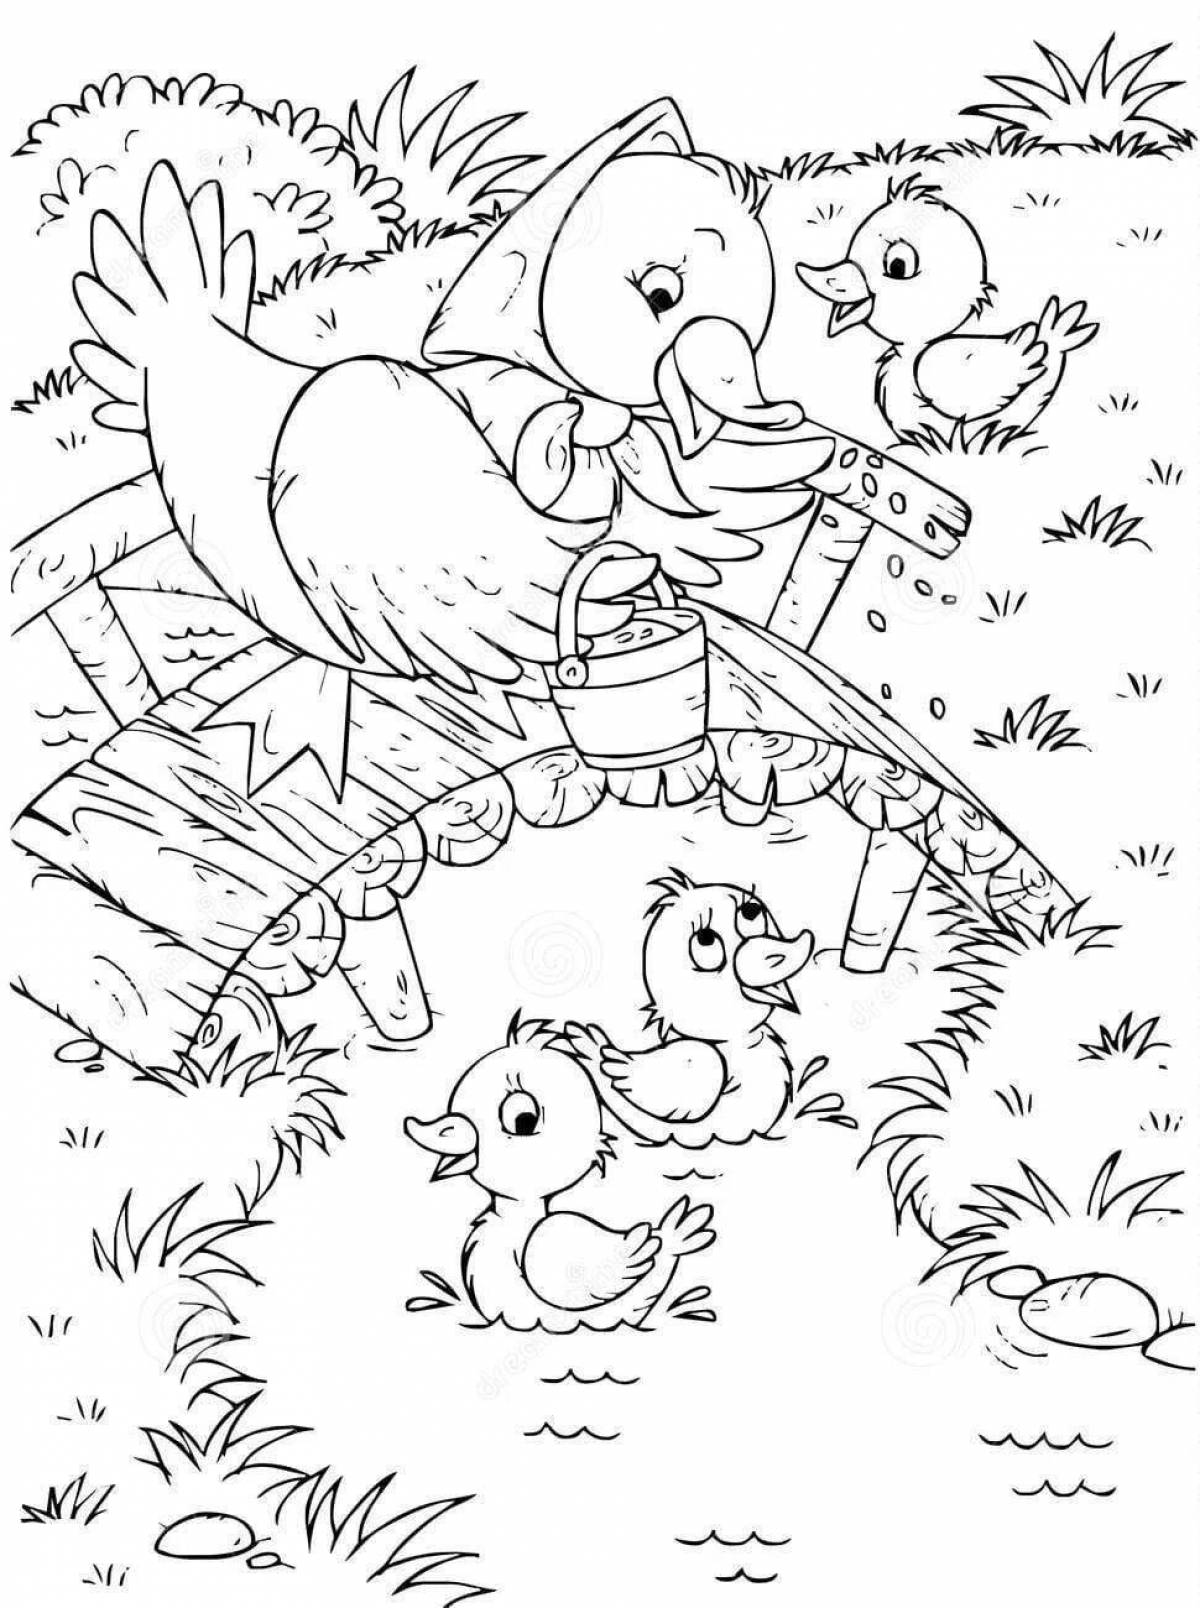 Great bird yard coloring page for students